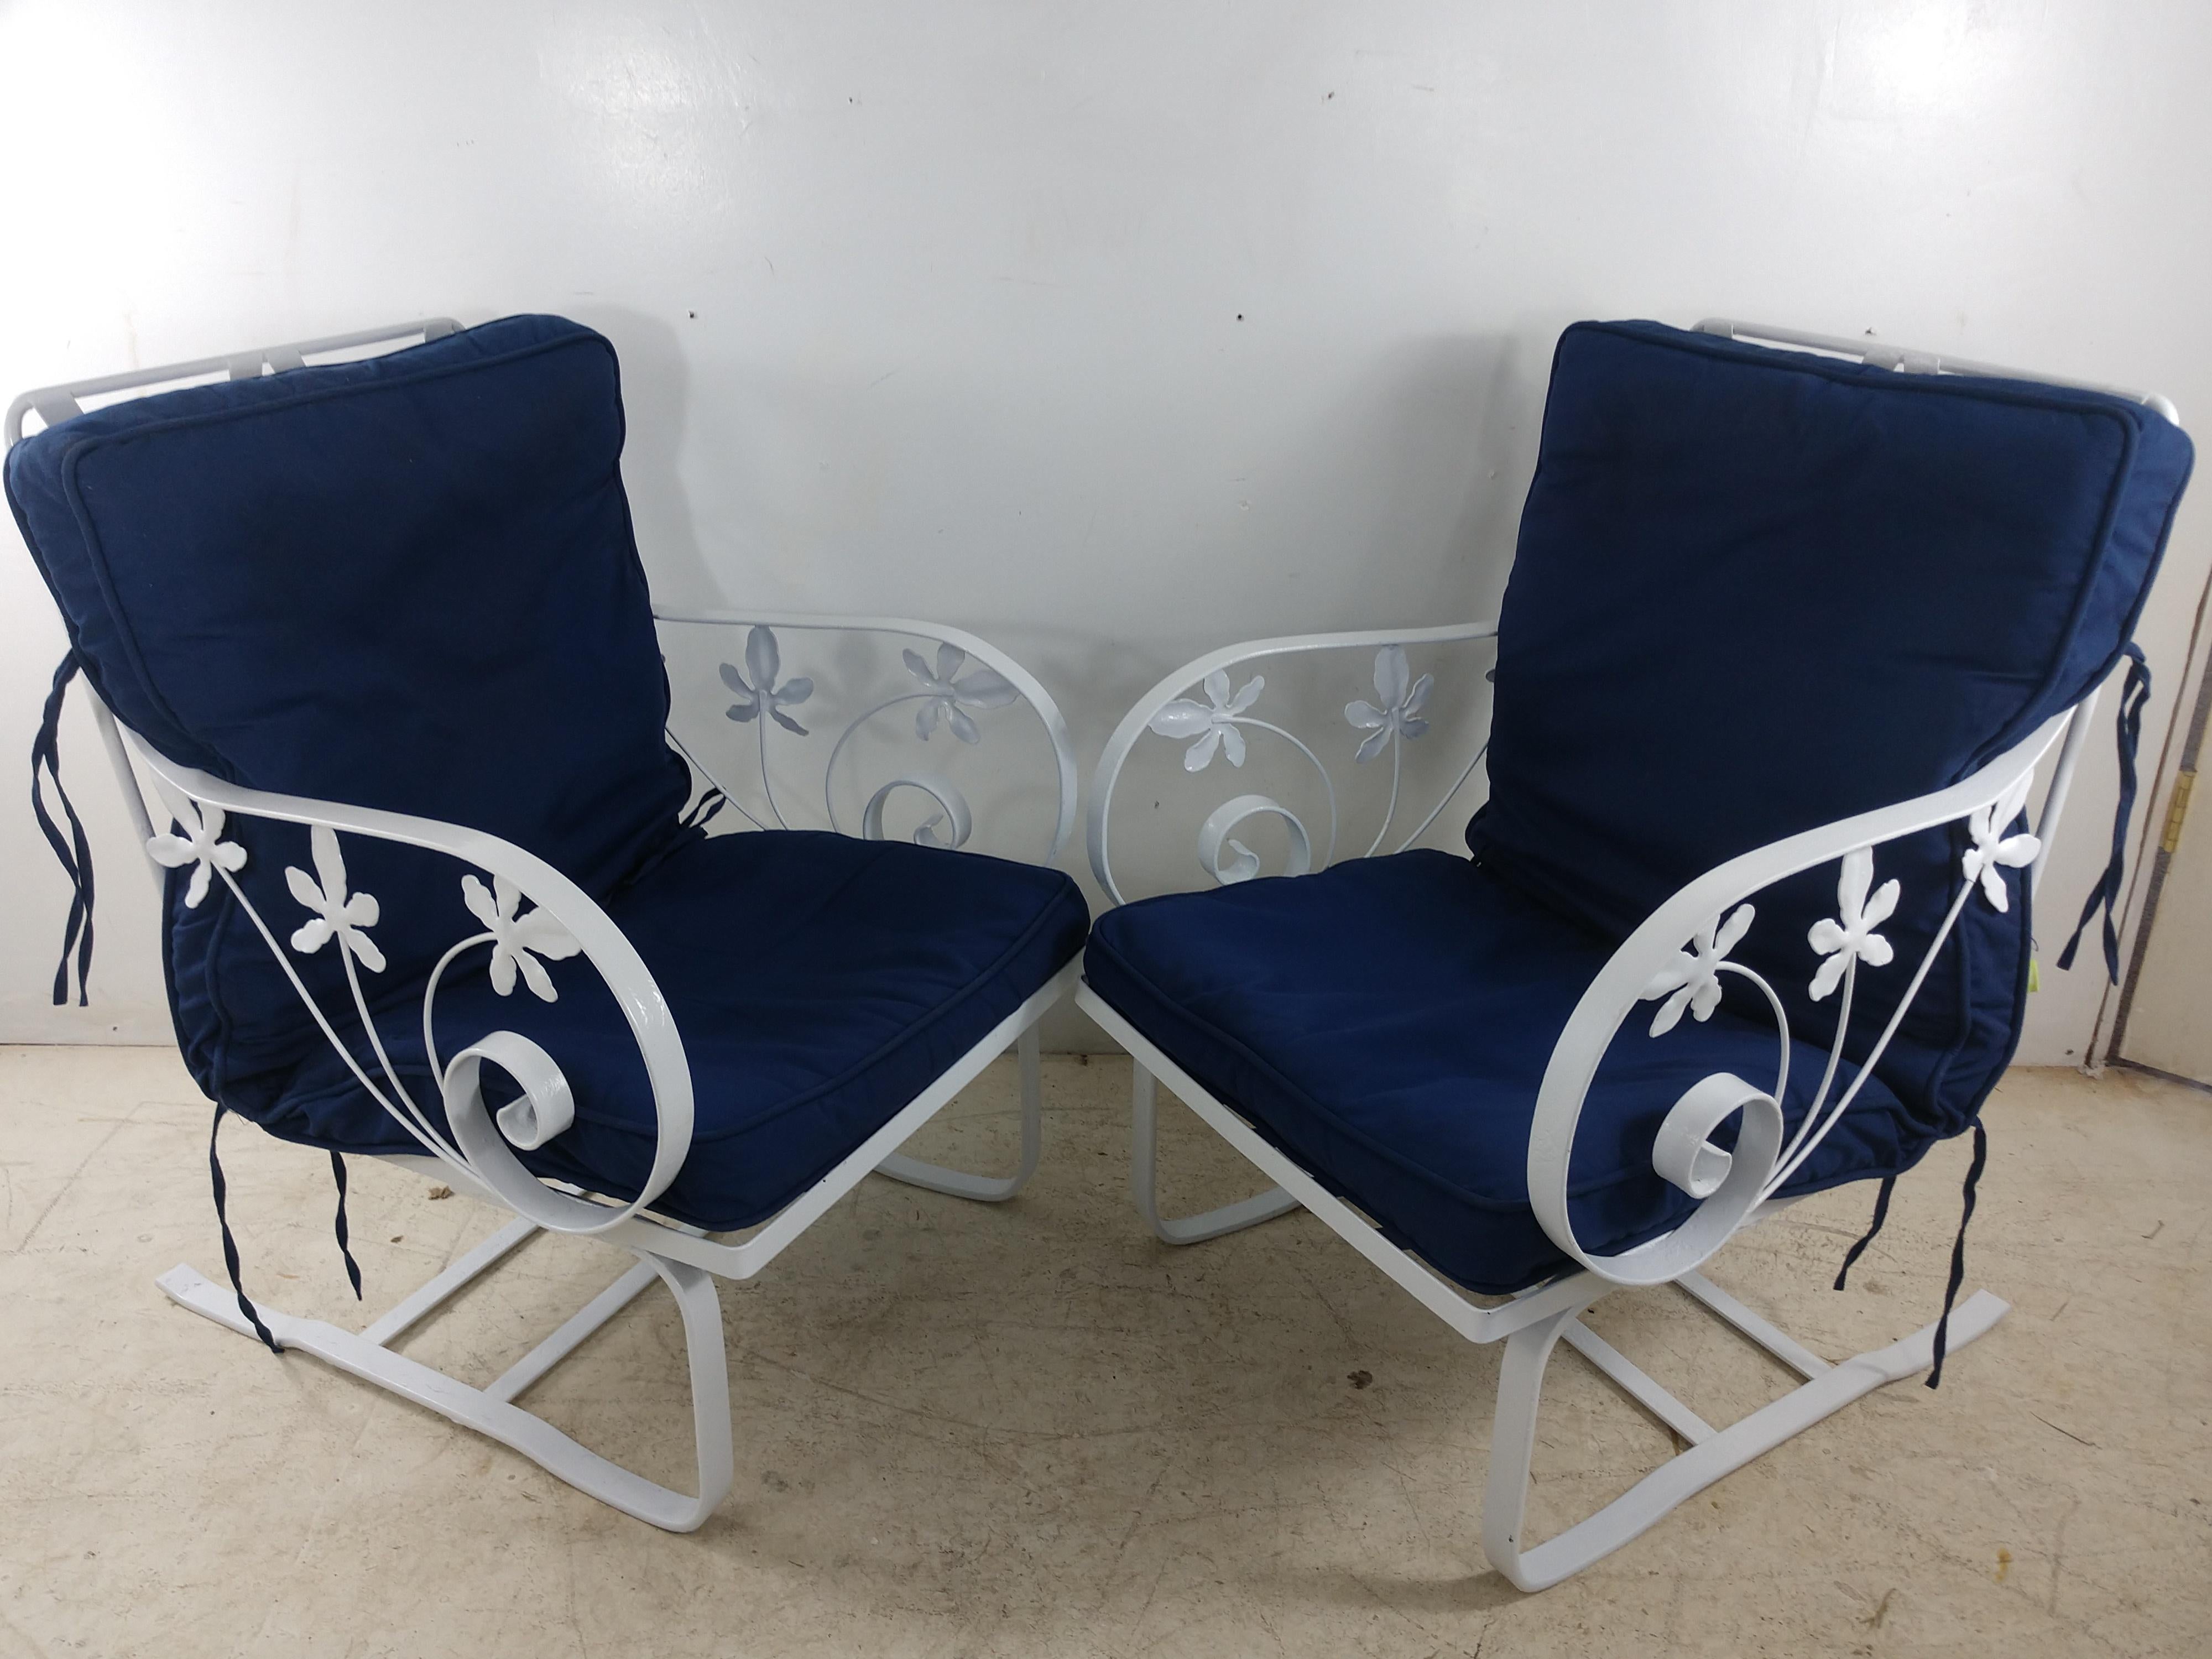 Modern Pair of Mid Century C1948 Iron Outdoor Lounge Chairs by Woodard